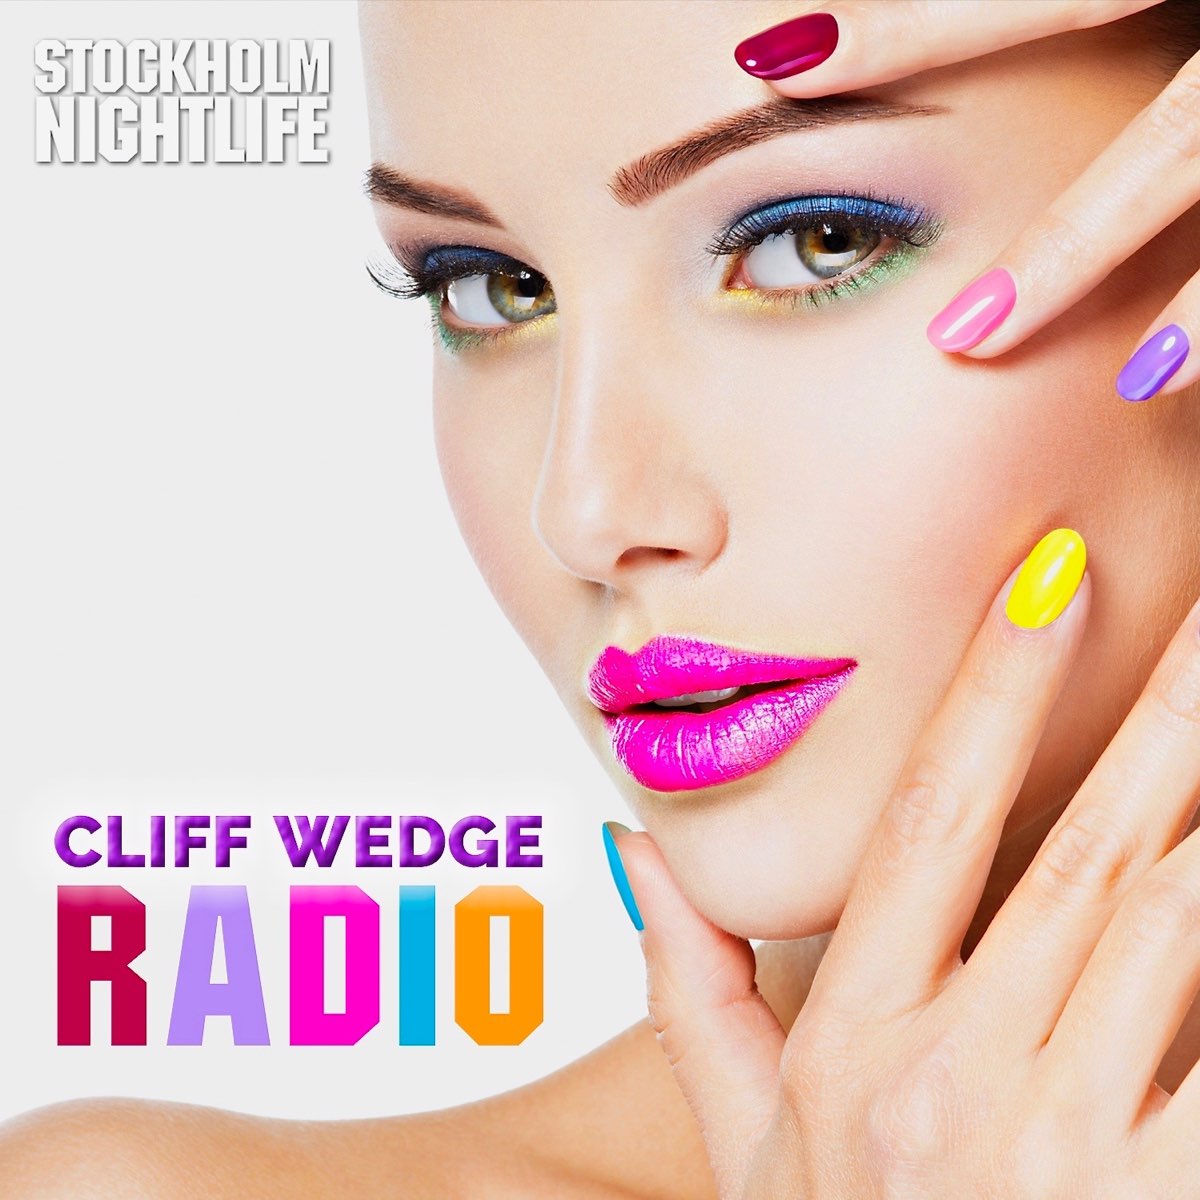 I wanna know cliff wedge. Cliff Wedge. Nightlife in Stockholm. Cliff Wedge Touch me (Extended). Cliff Wedge feat. Vasso - Angel Eyes.